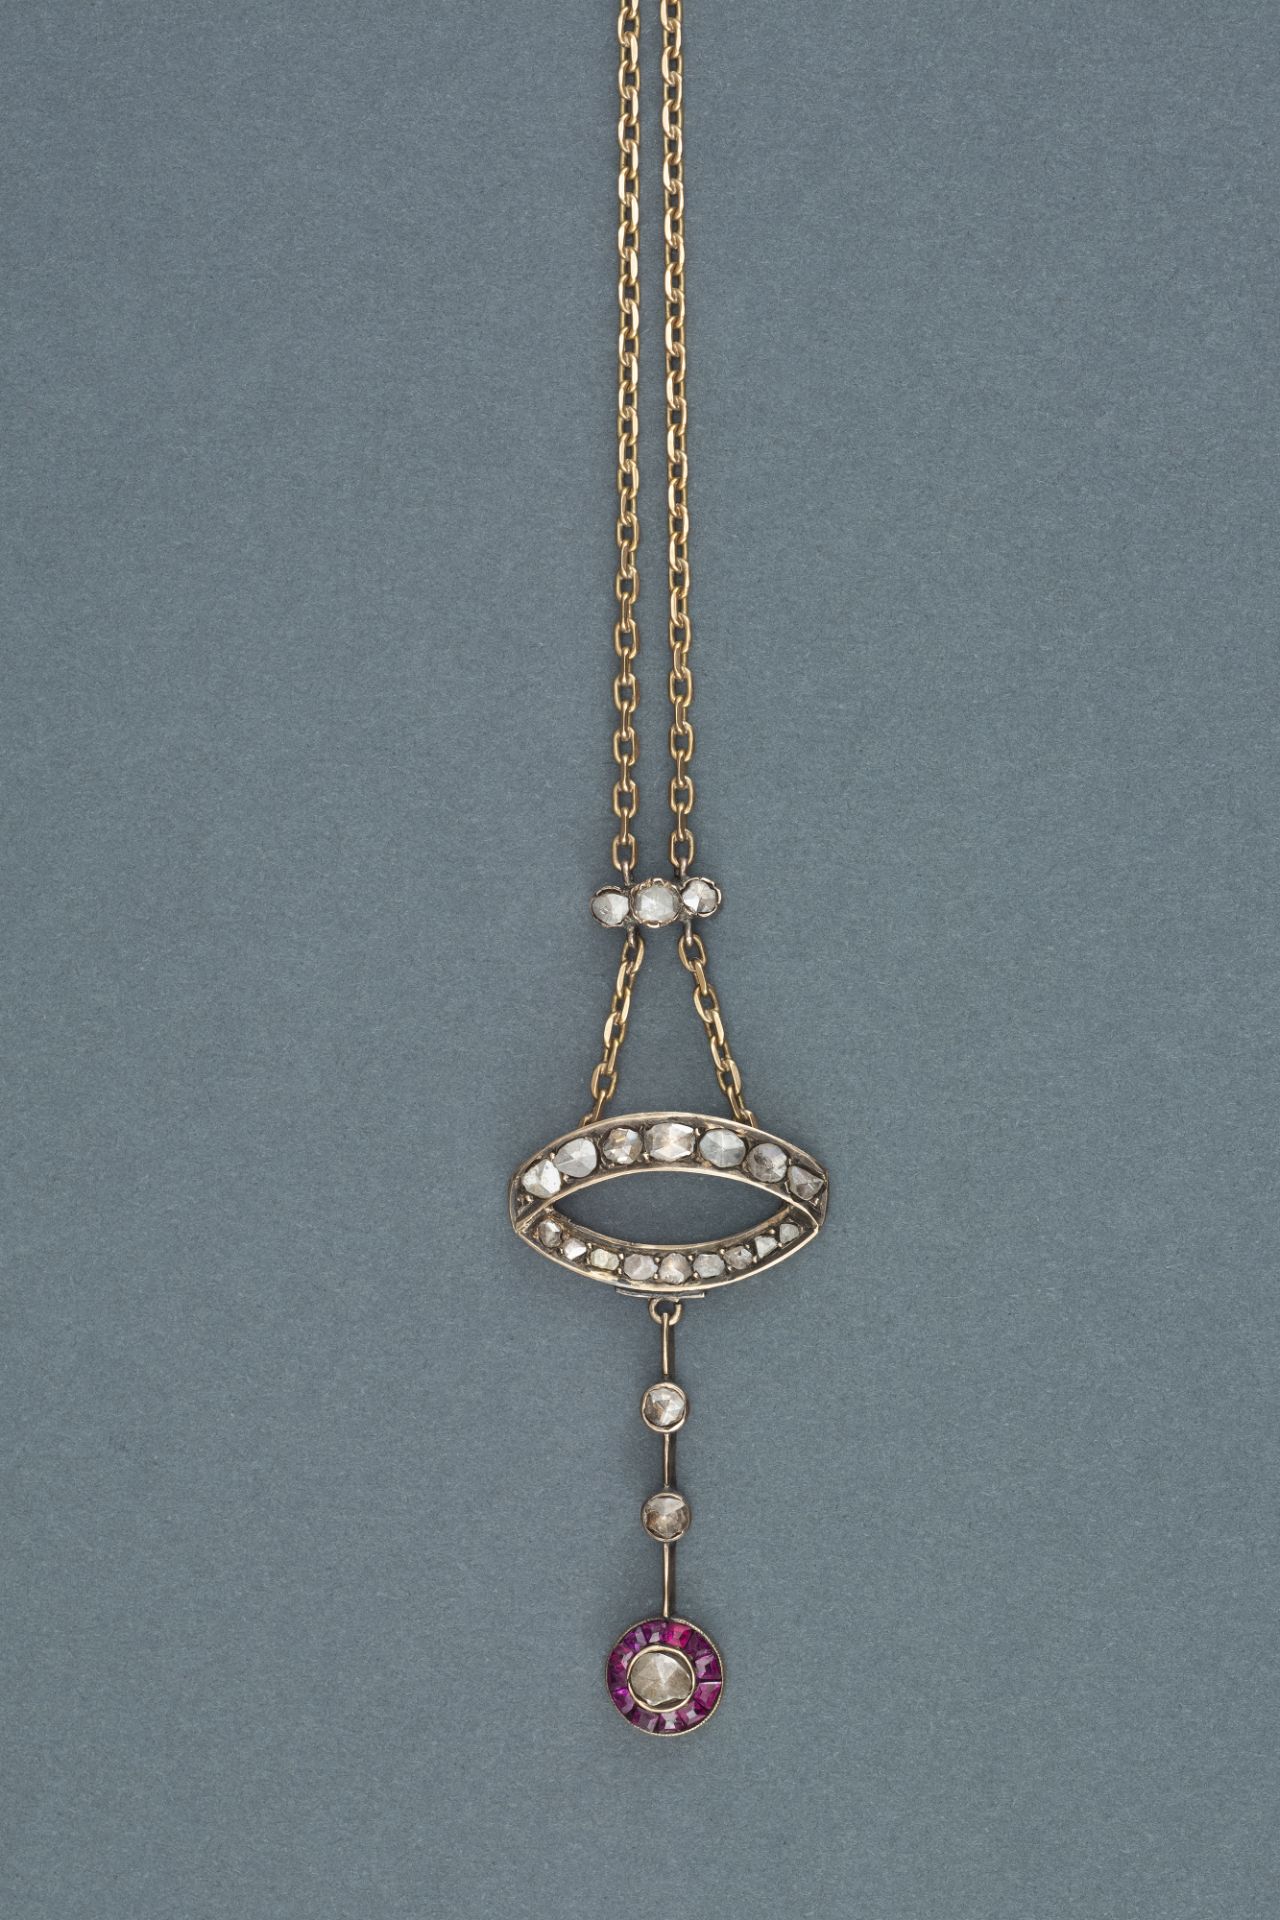 Necklace Art Deco  - Image 2 of 2